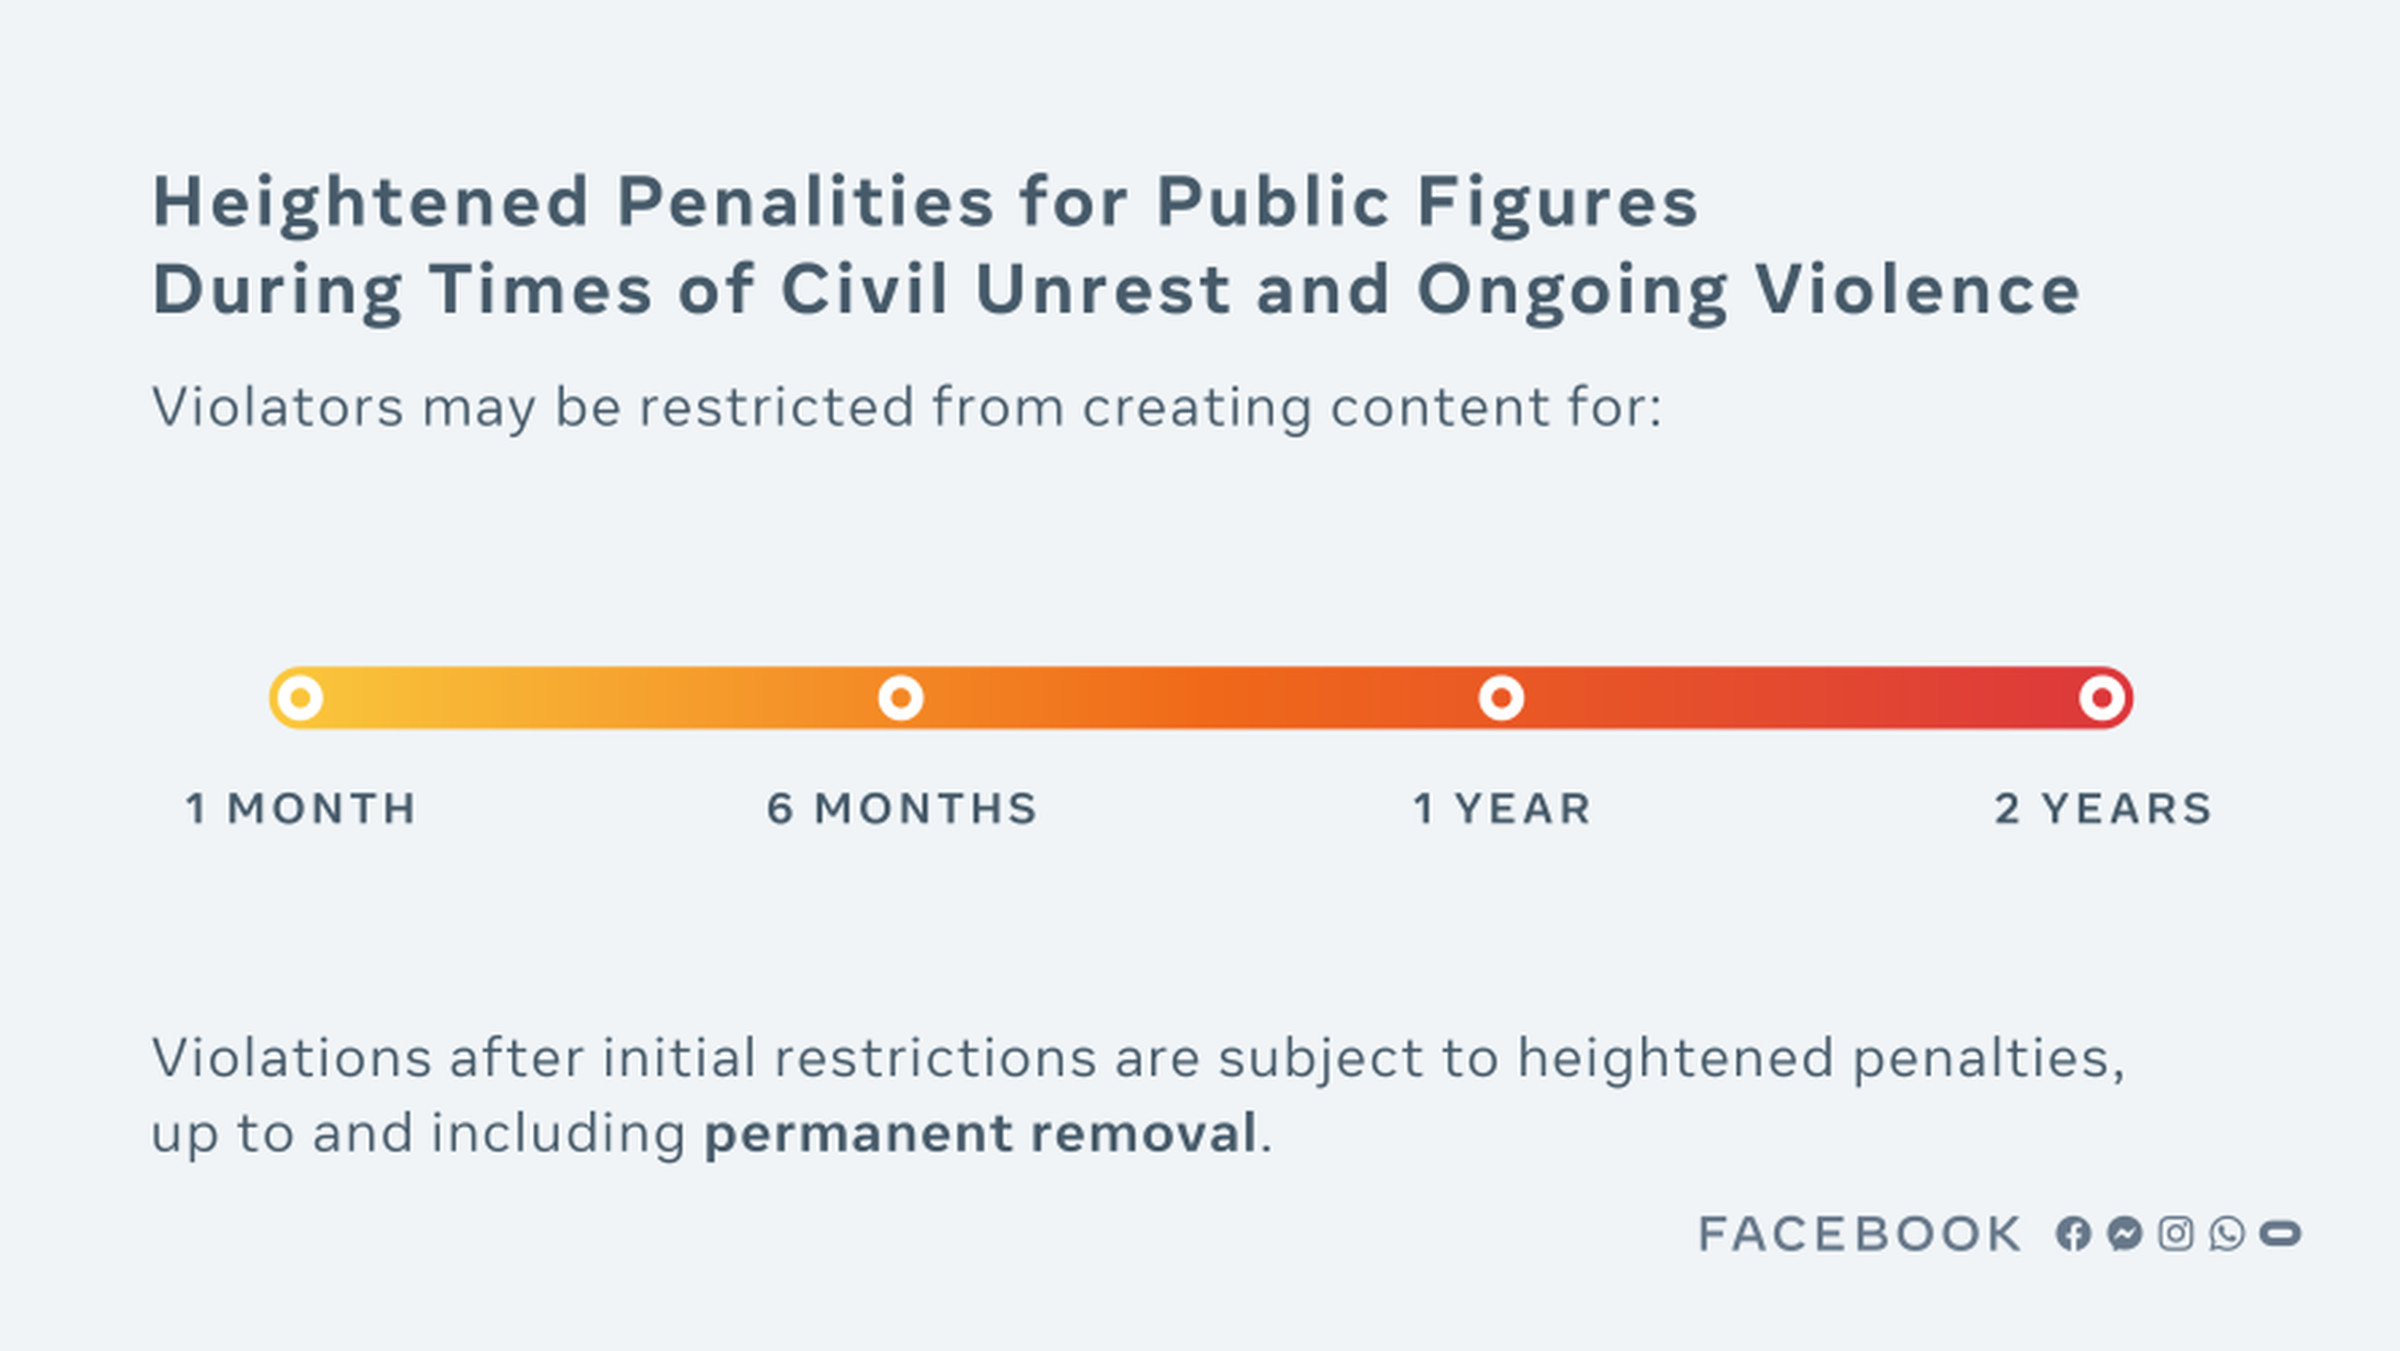 Facebook’s way of explaining how it will treat public figures who break its rules going forward.